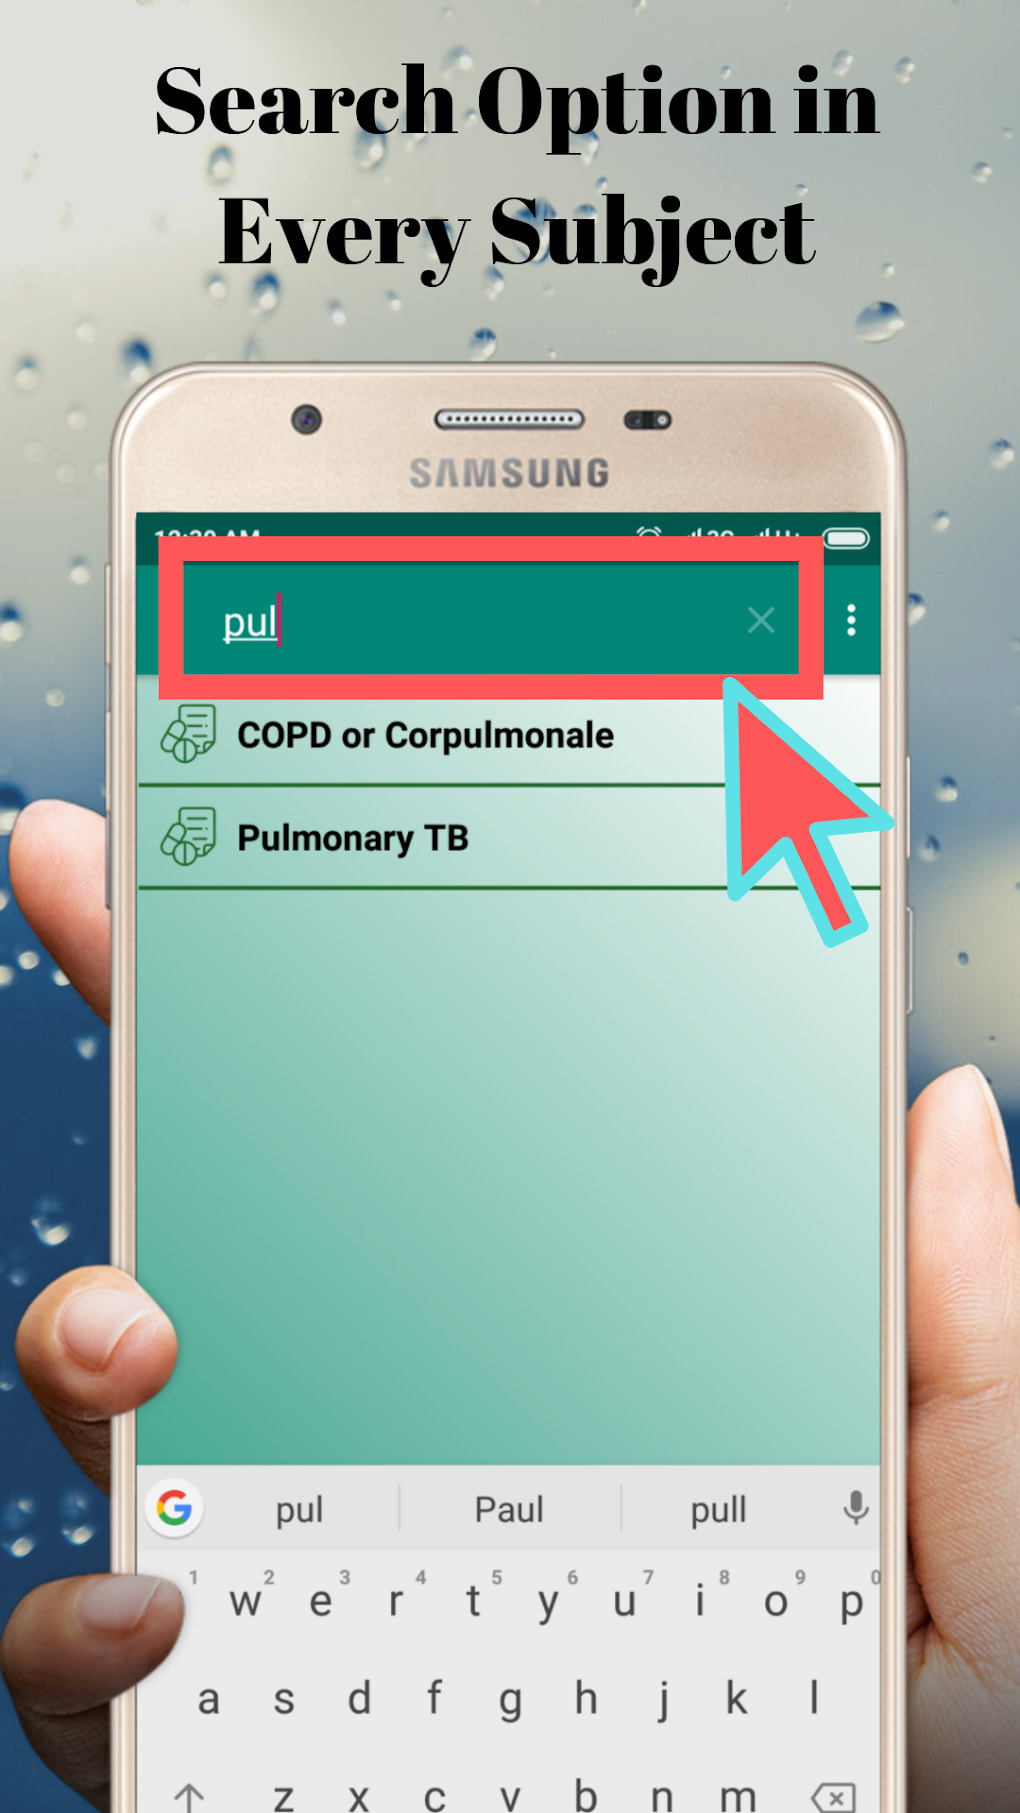 dr.consulta - APK Download for Android